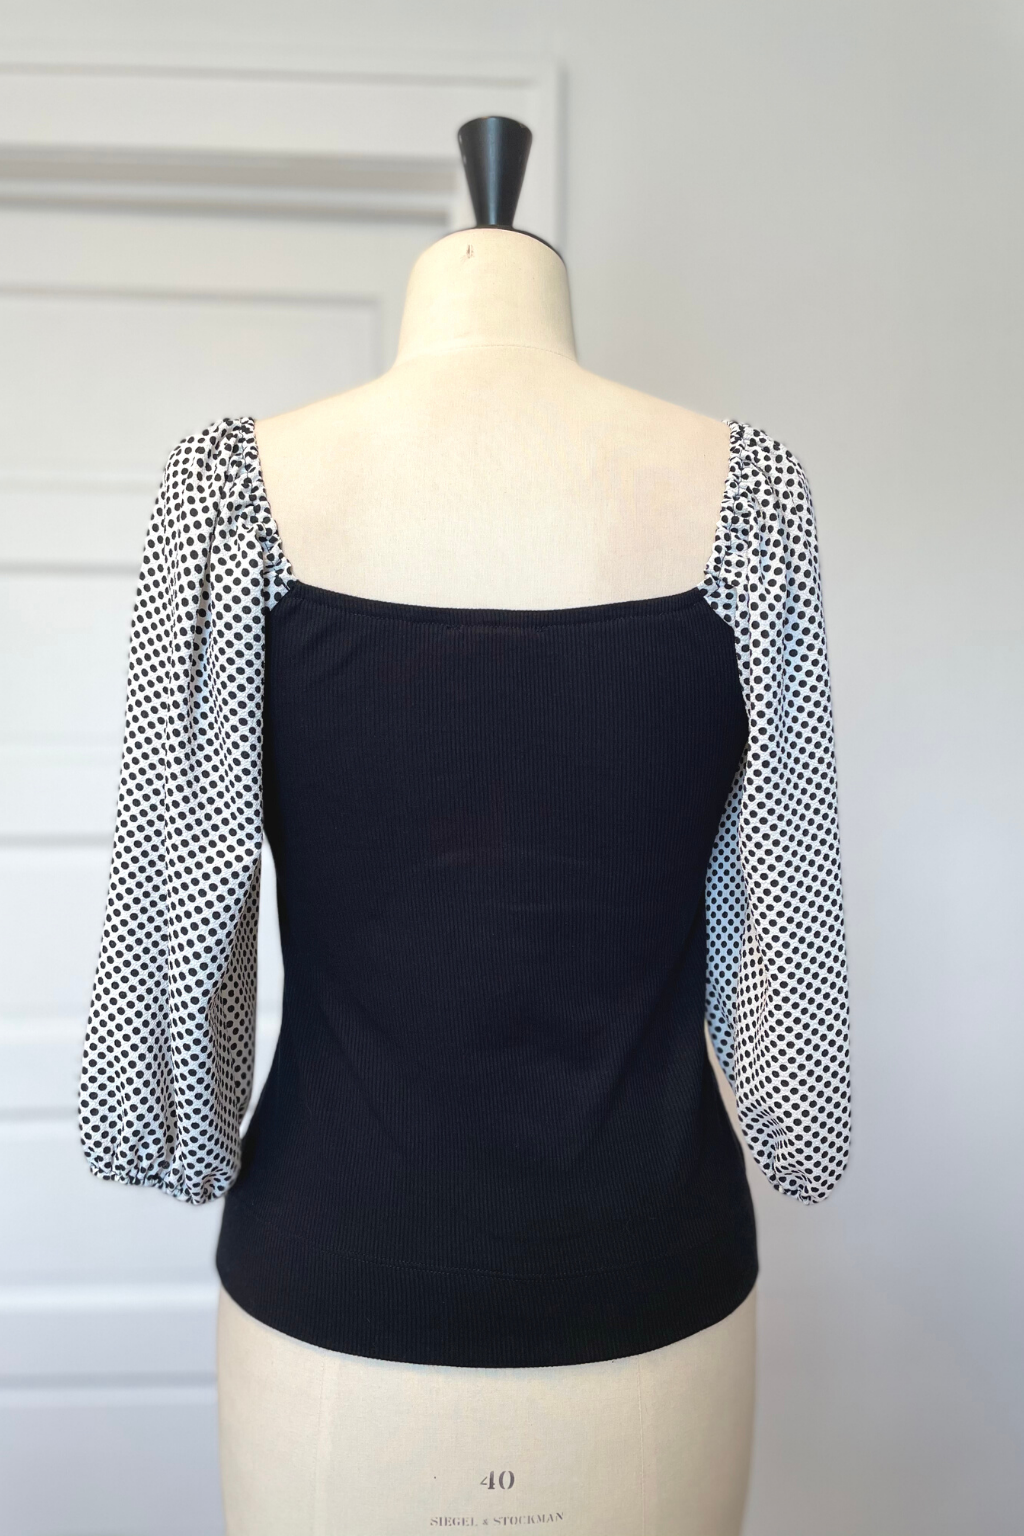 KOKOON Hutton Square Neck Top in Black Rib Knit With White and Black Polka Dot Sleeves Back